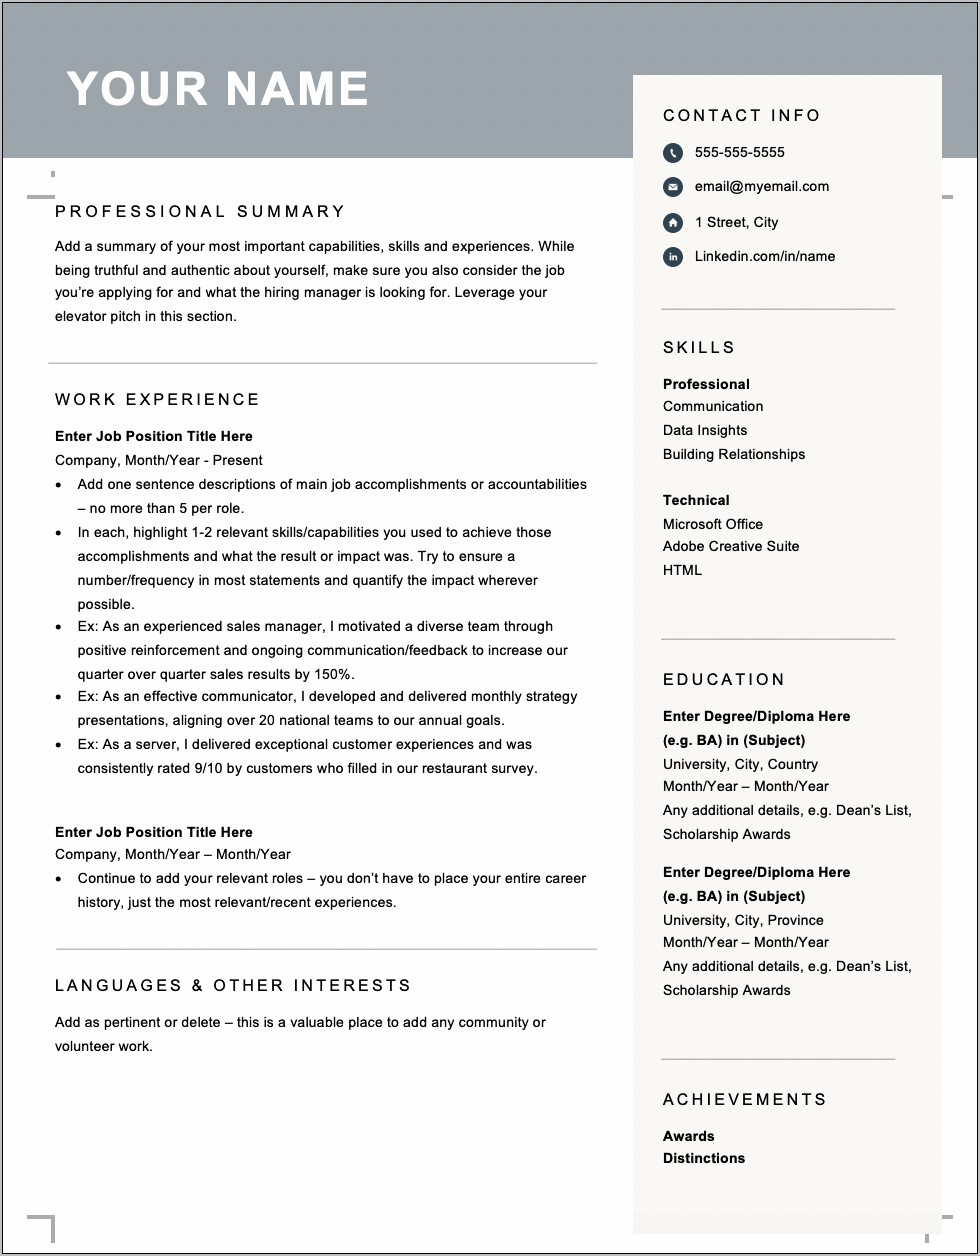 Resume Format For Abroad Job Word File